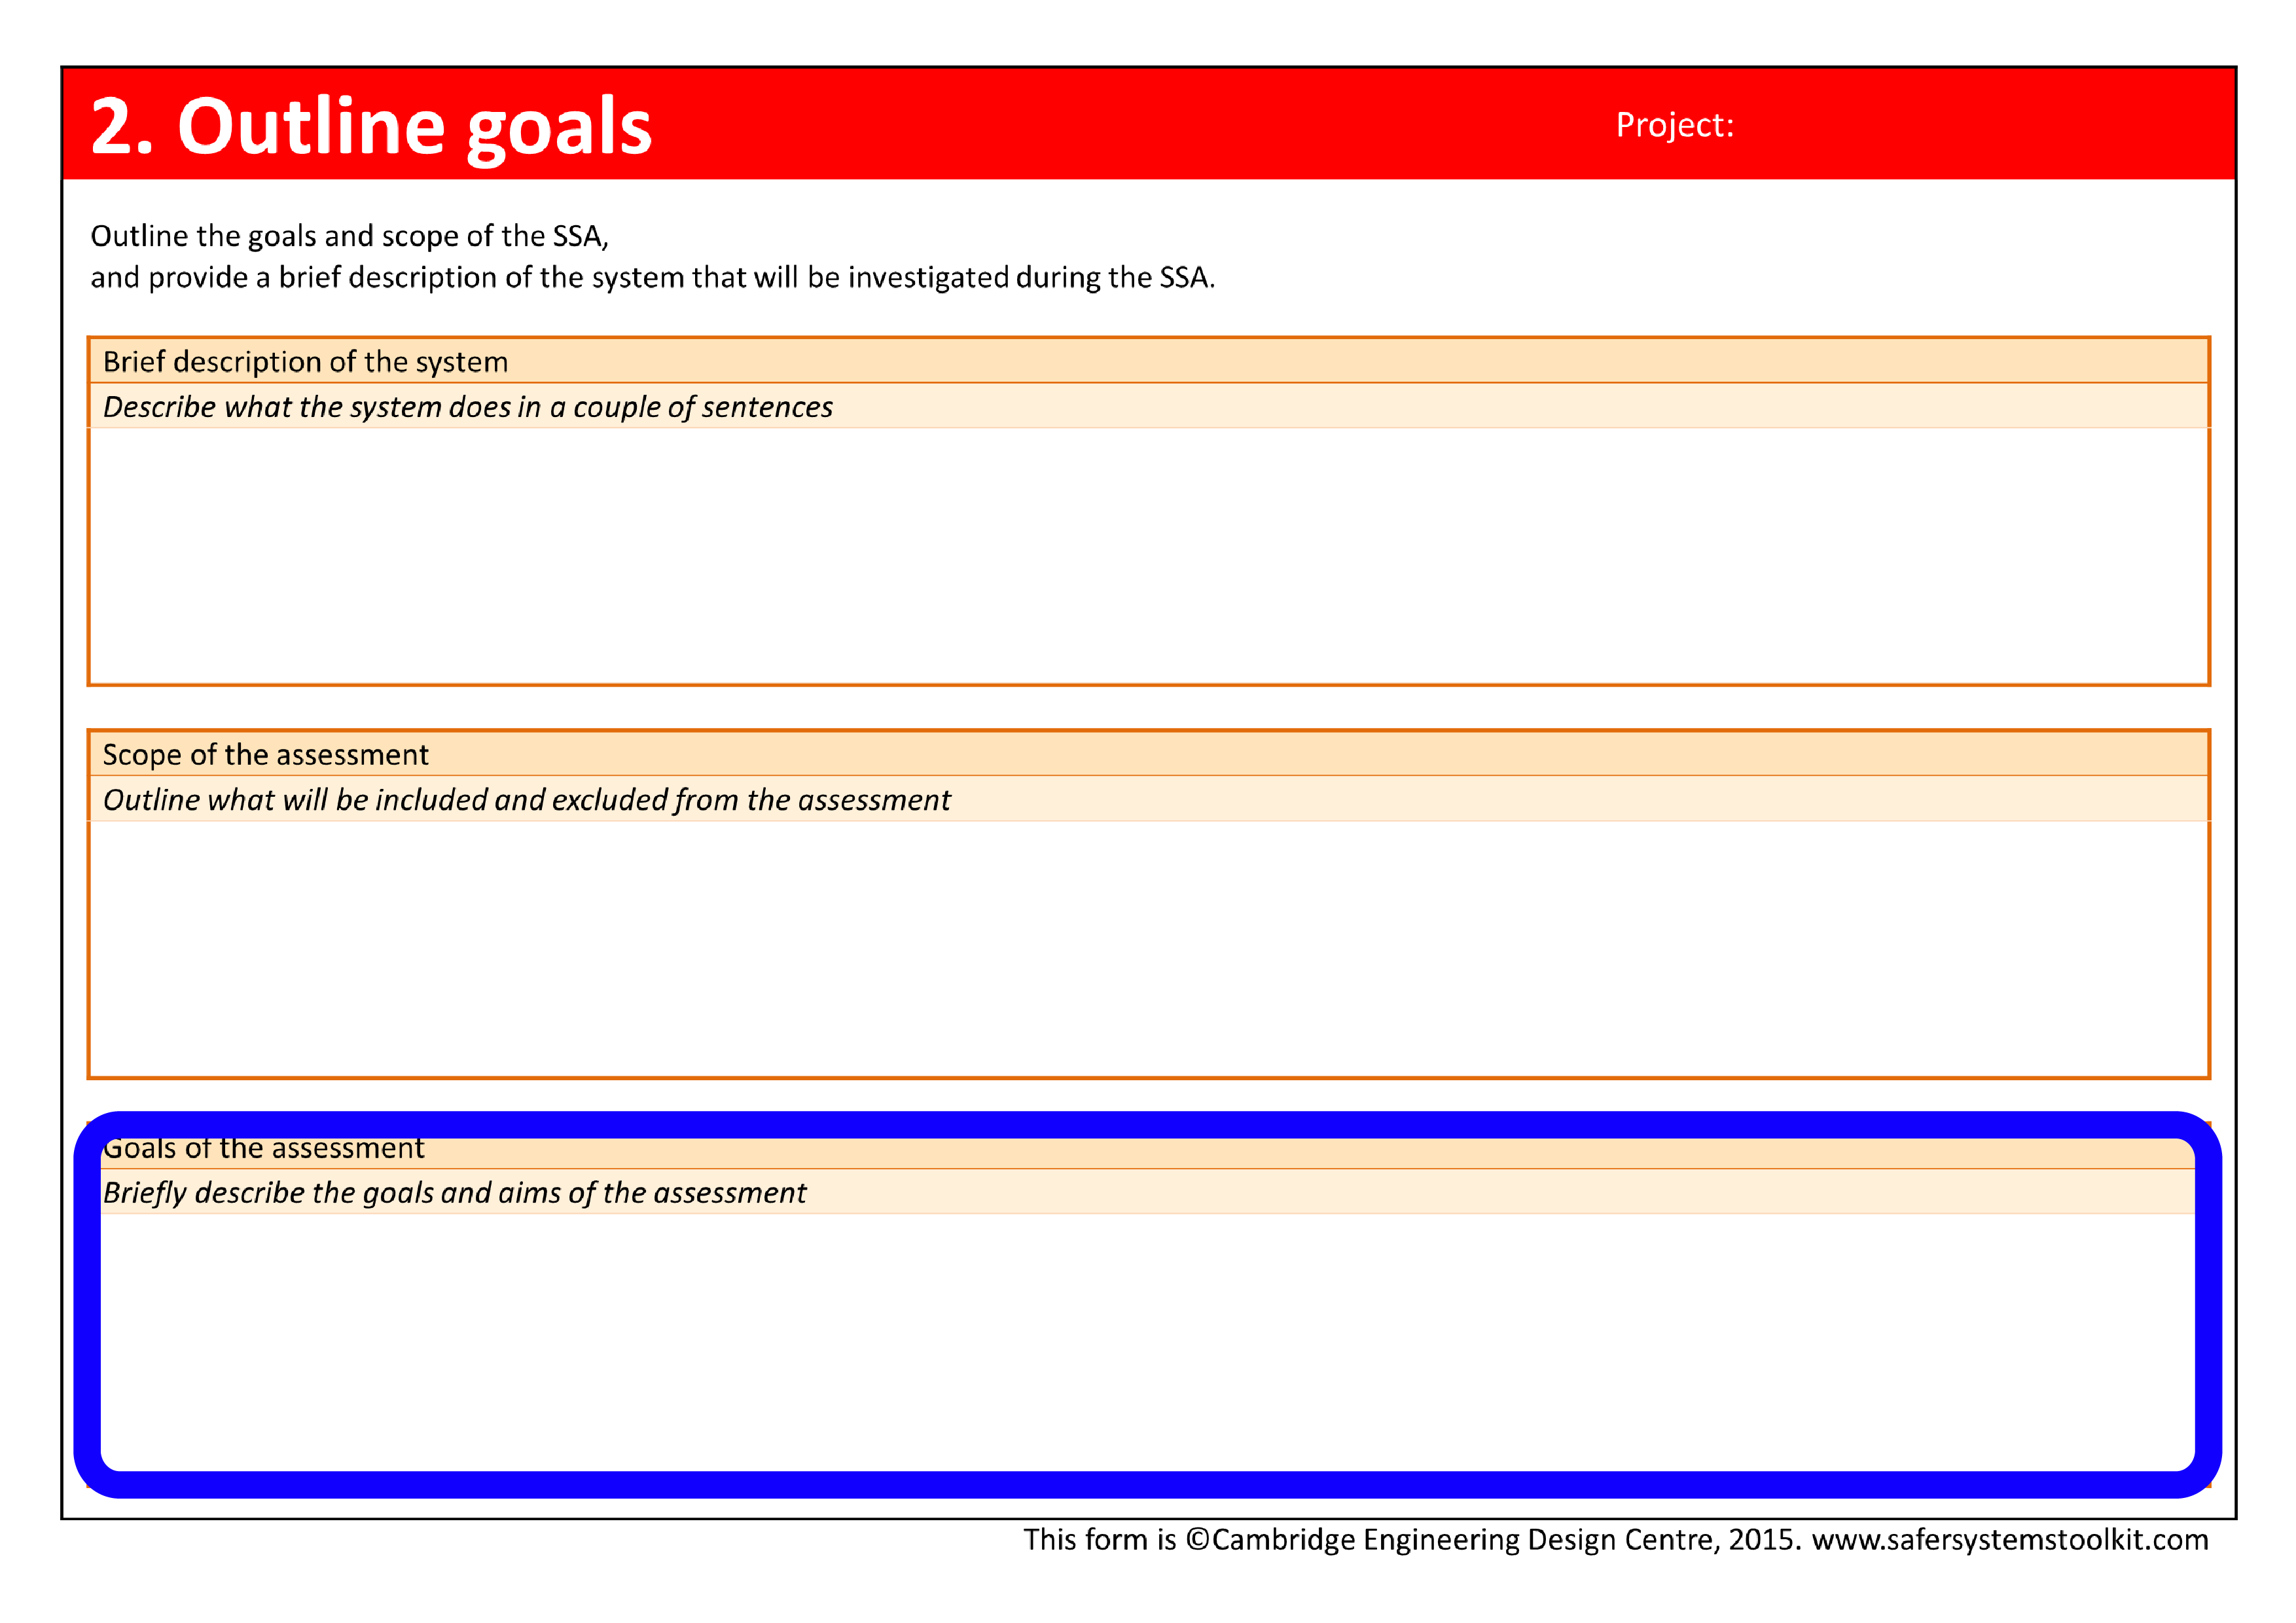 Screenshot of Outline goals page of the assessment form